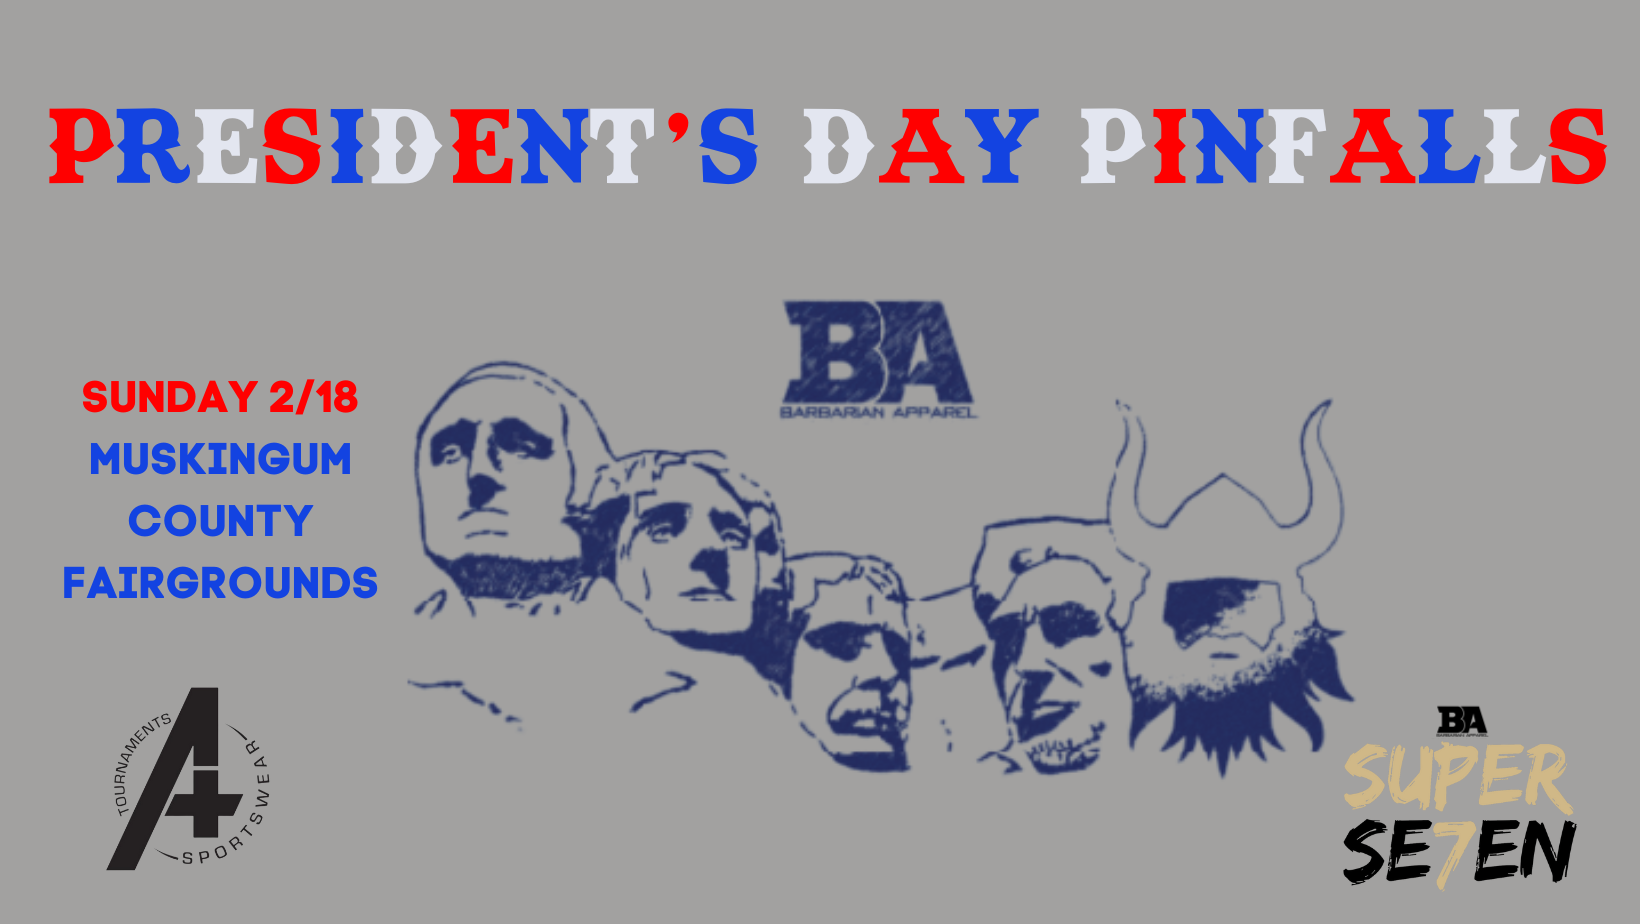 Presidents Day Pinfalls